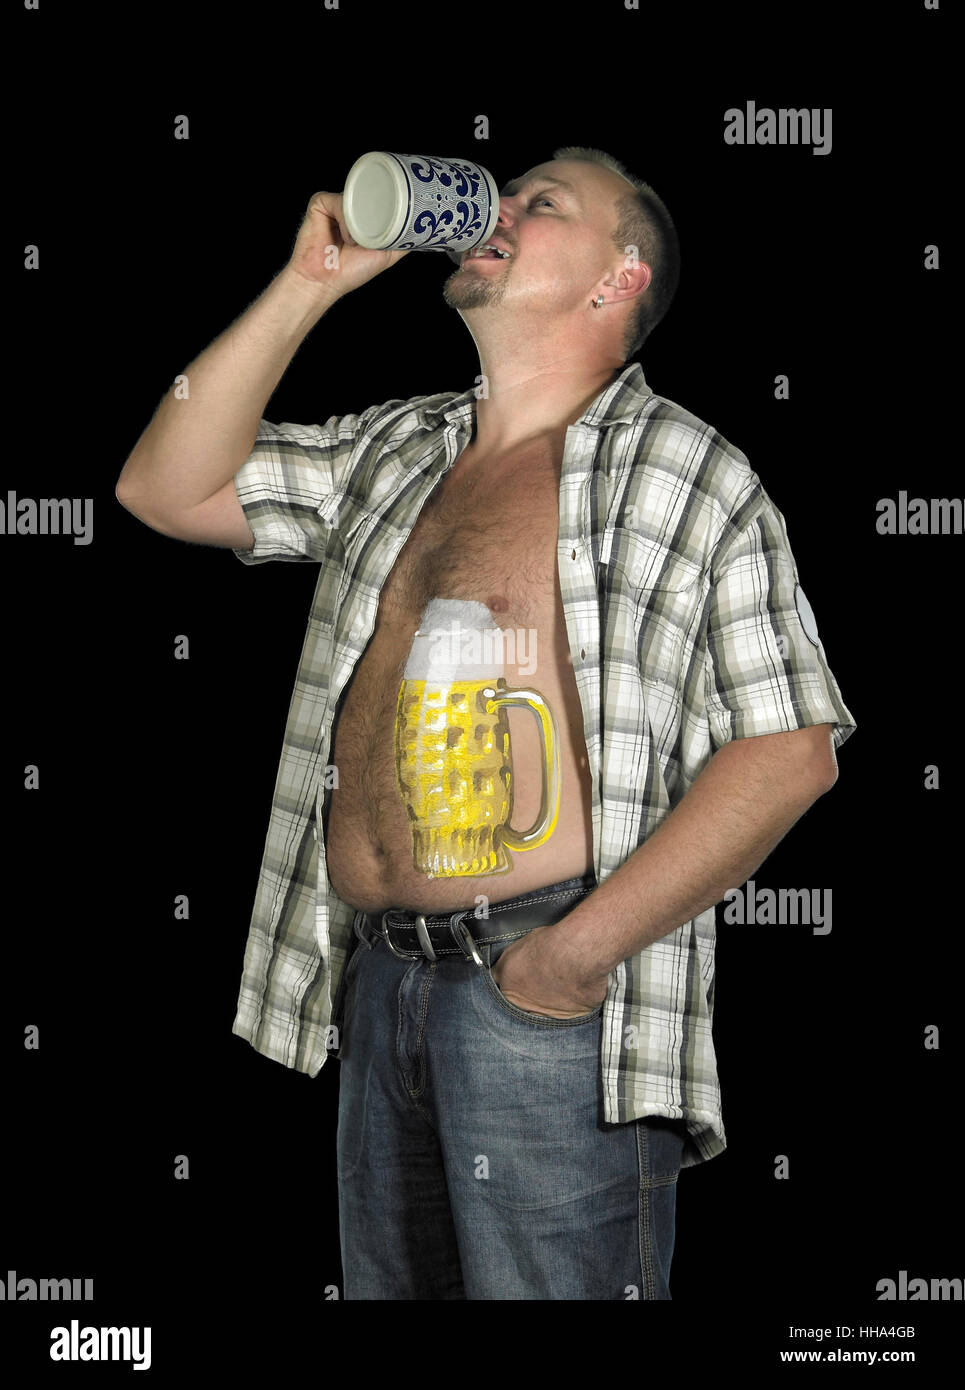 drinking man with beer belly Stock Photo